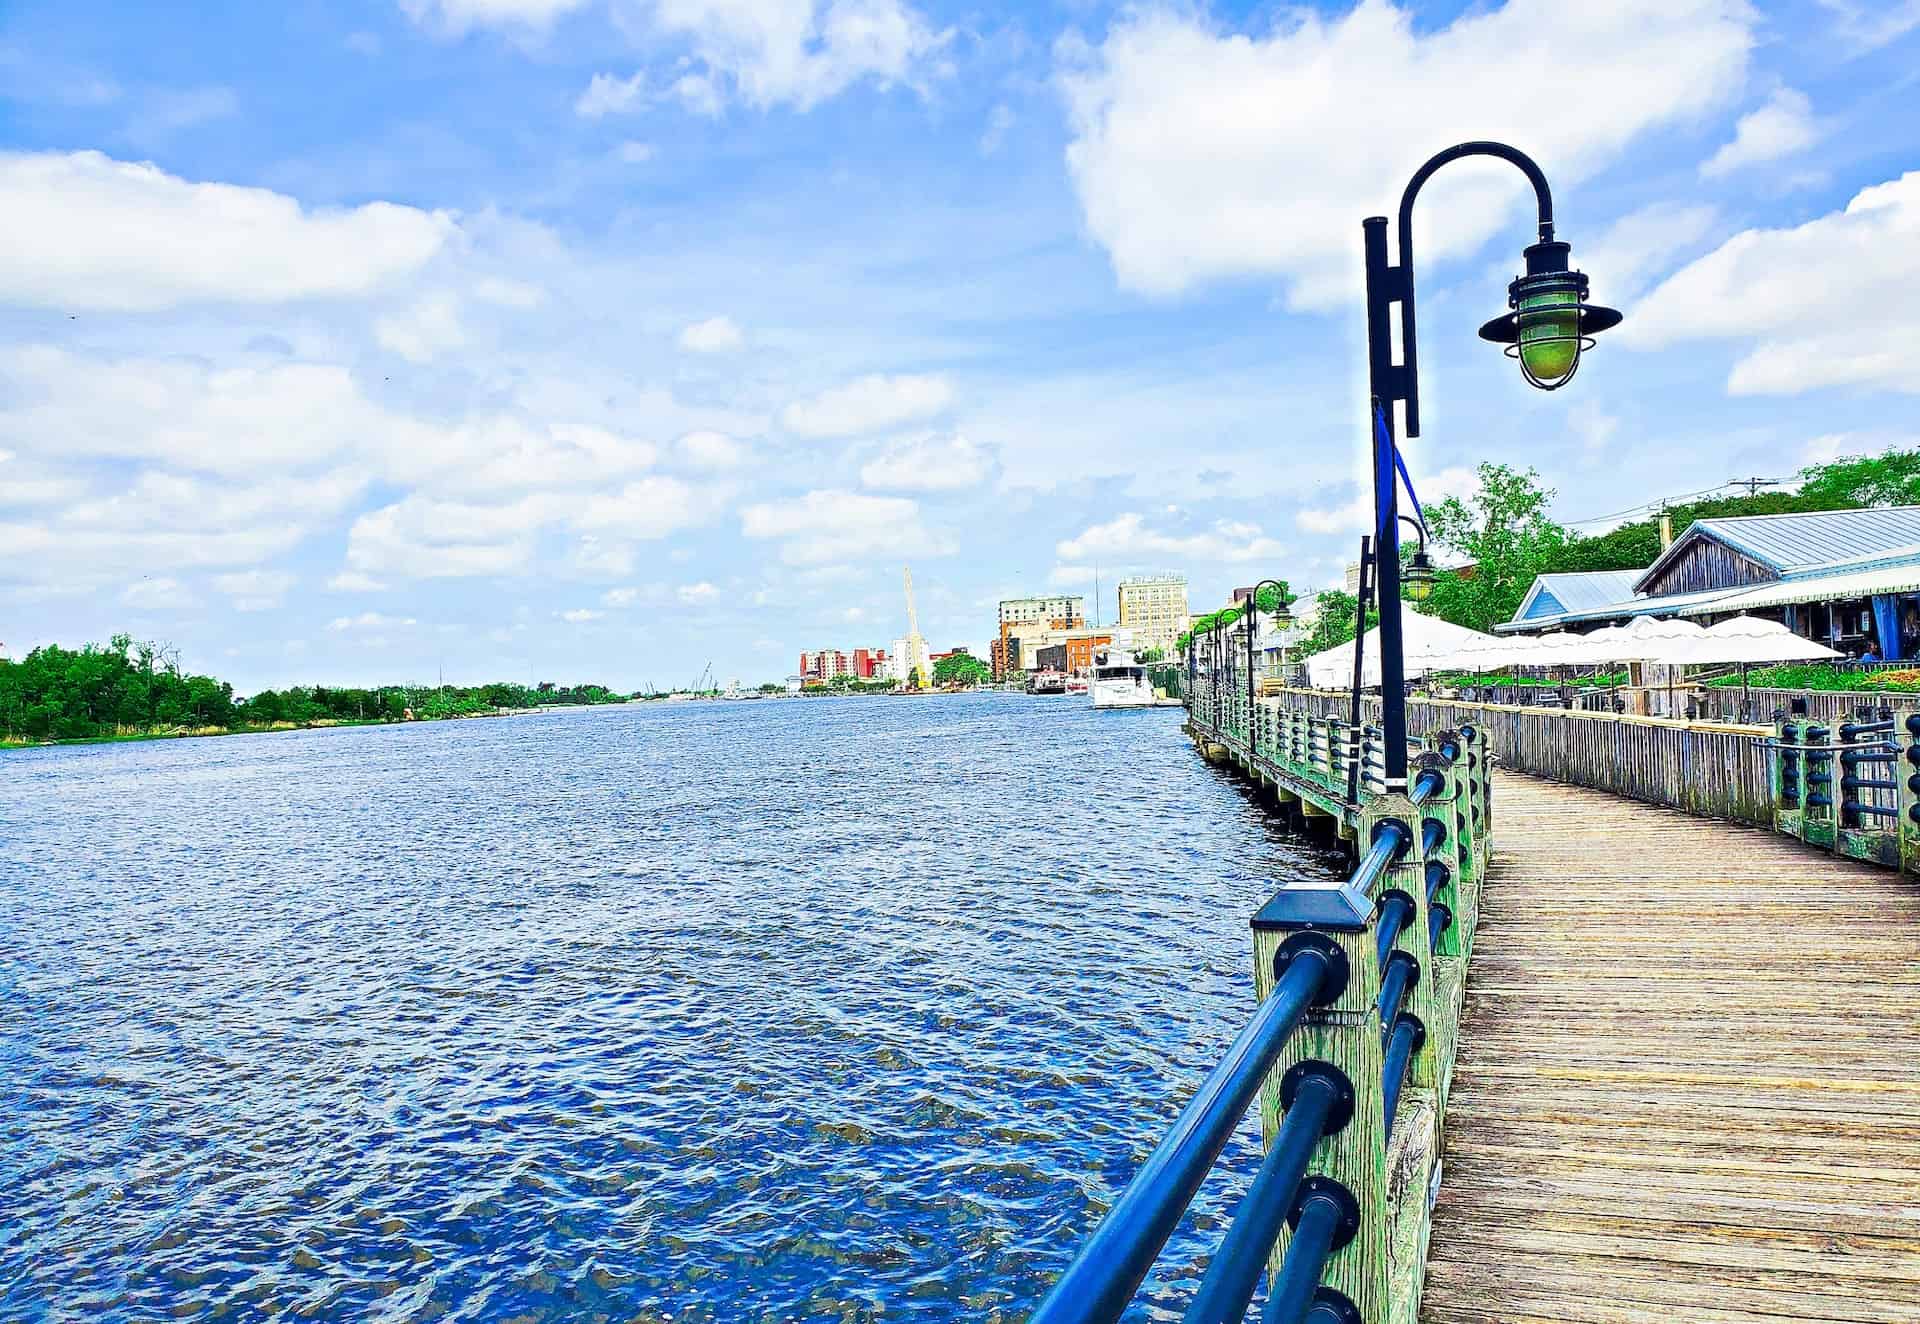 Best things to do in Wilmington NC - Pat Stoy - Cape Fear Riverwalk by Kevin Dunlap on Unsplash